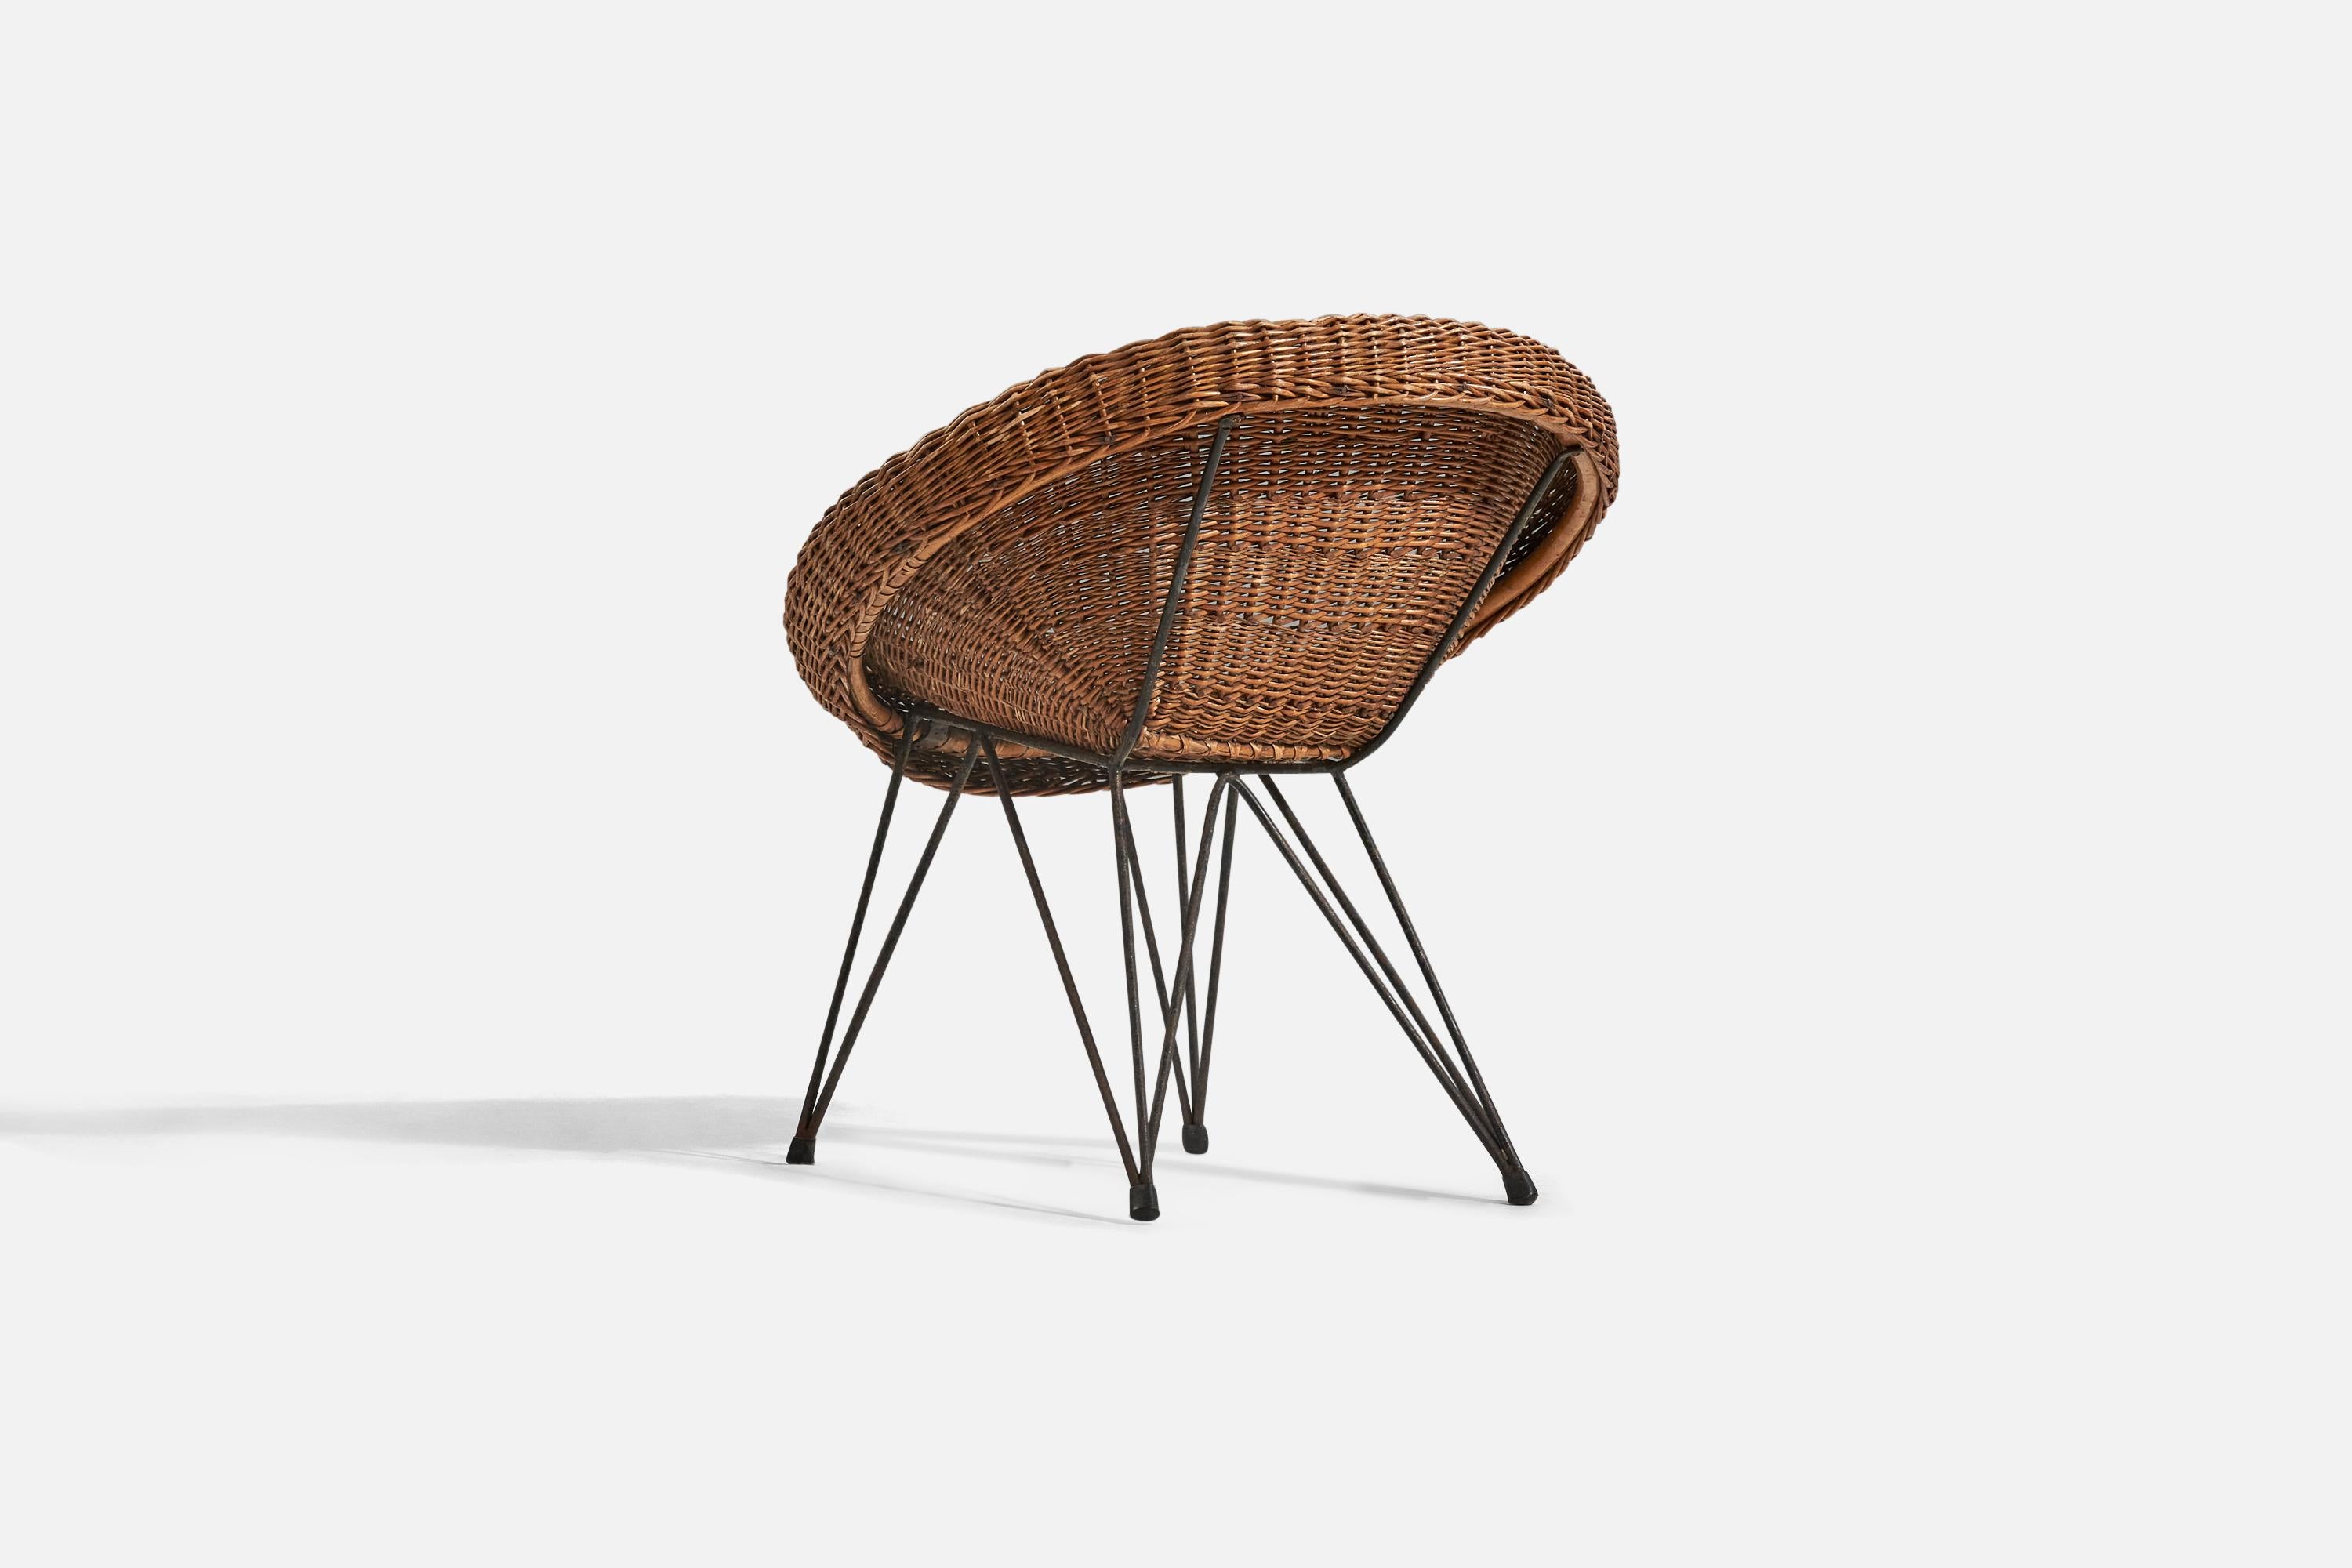 Mid-20th Century Italian Designer, Small Chair, Wicker, Metal, Italy, 1950s For Sale